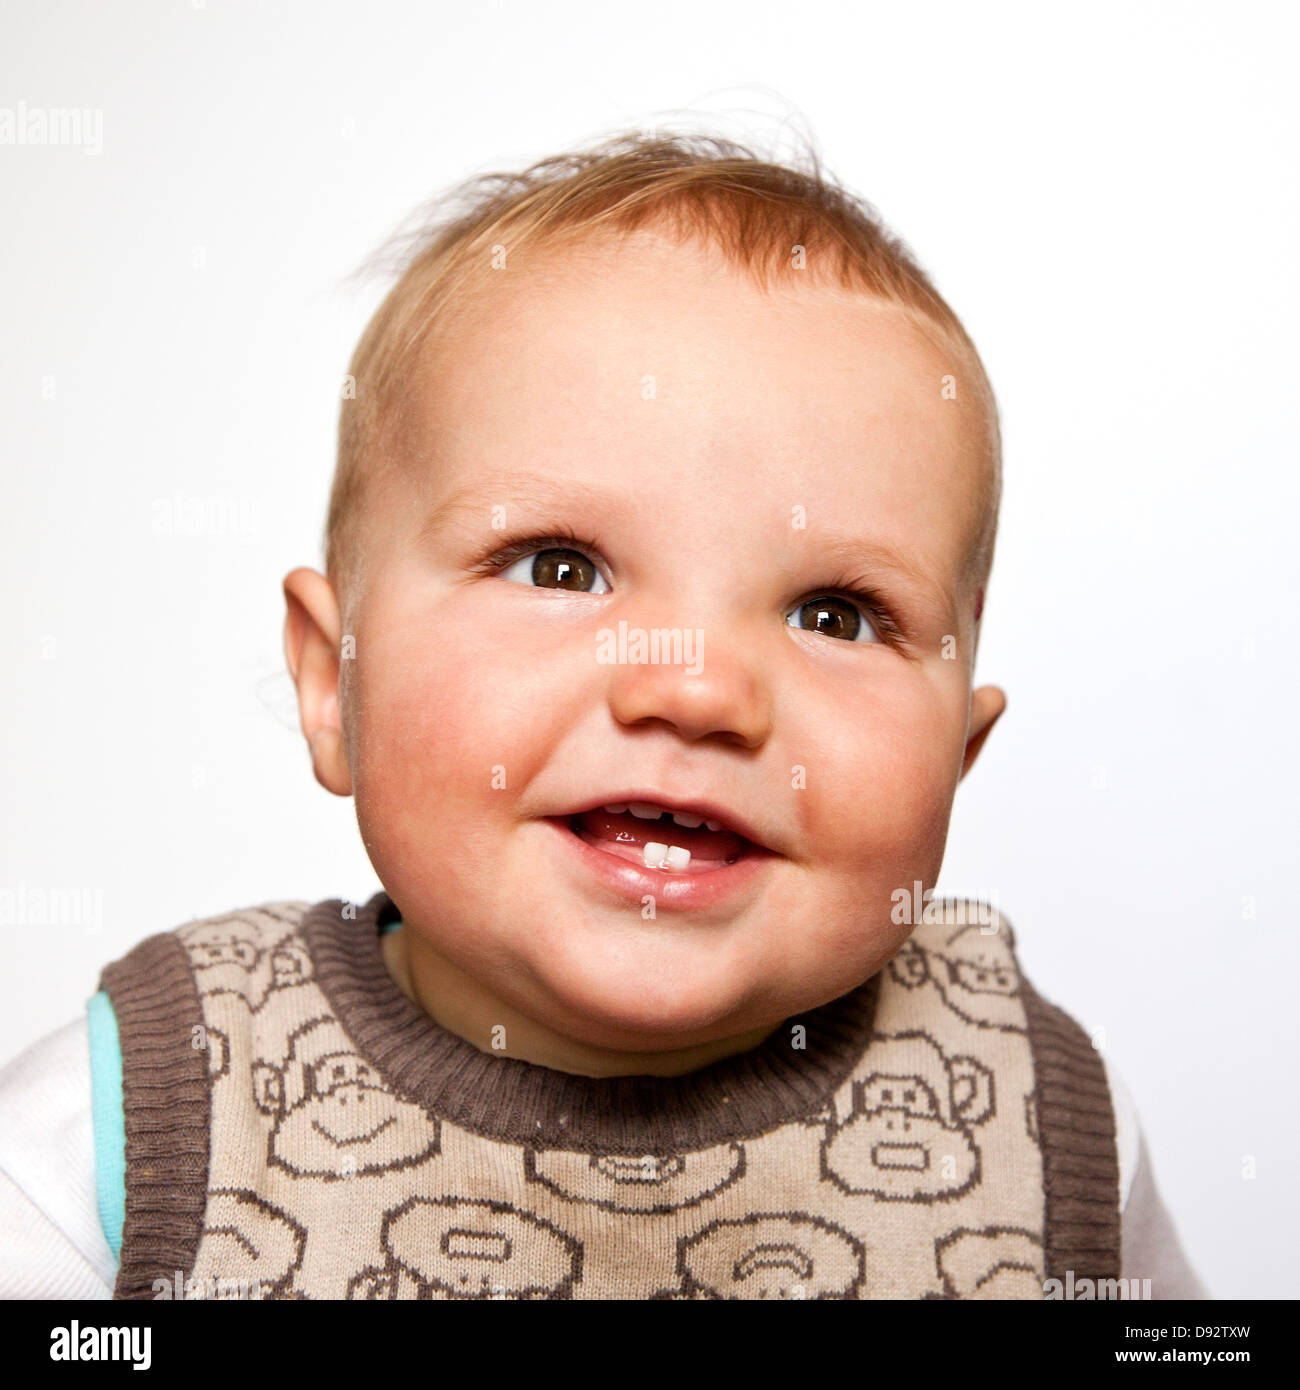 A baby boy looking up happily, head and shoulders portrait Stock Photo